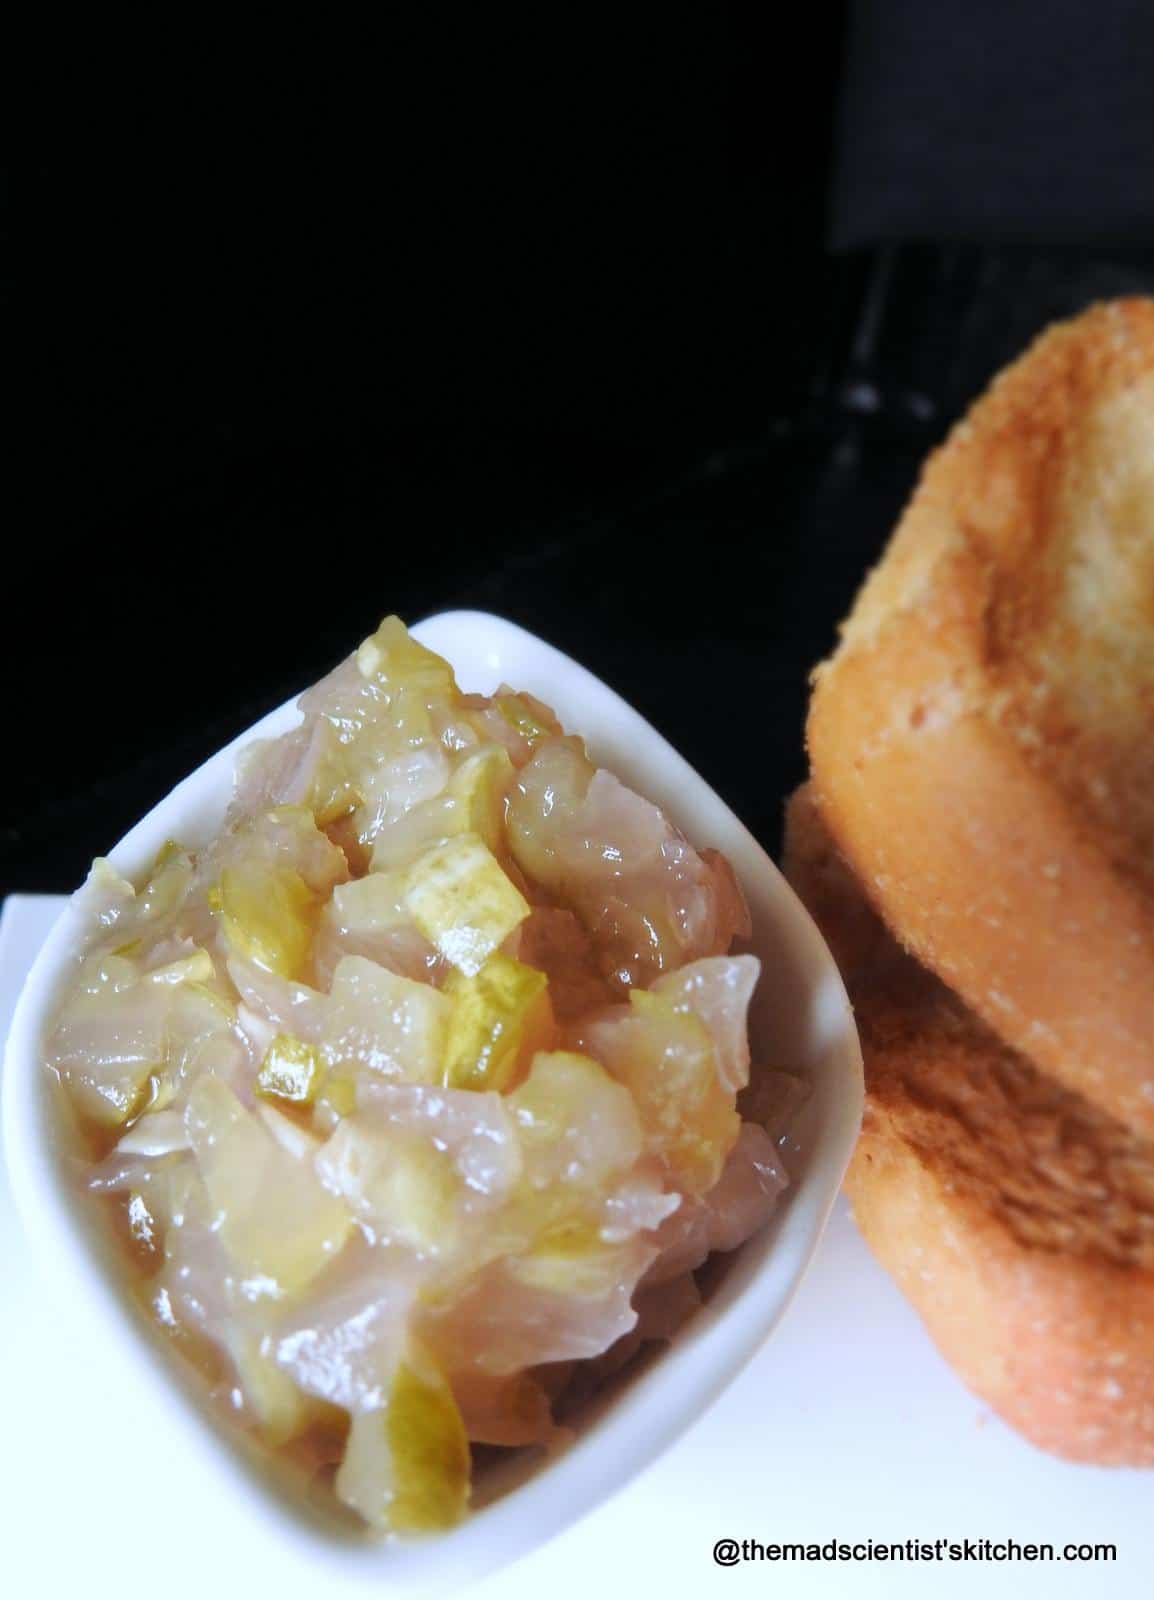 Homemade Pickle Relish, American Cuisine